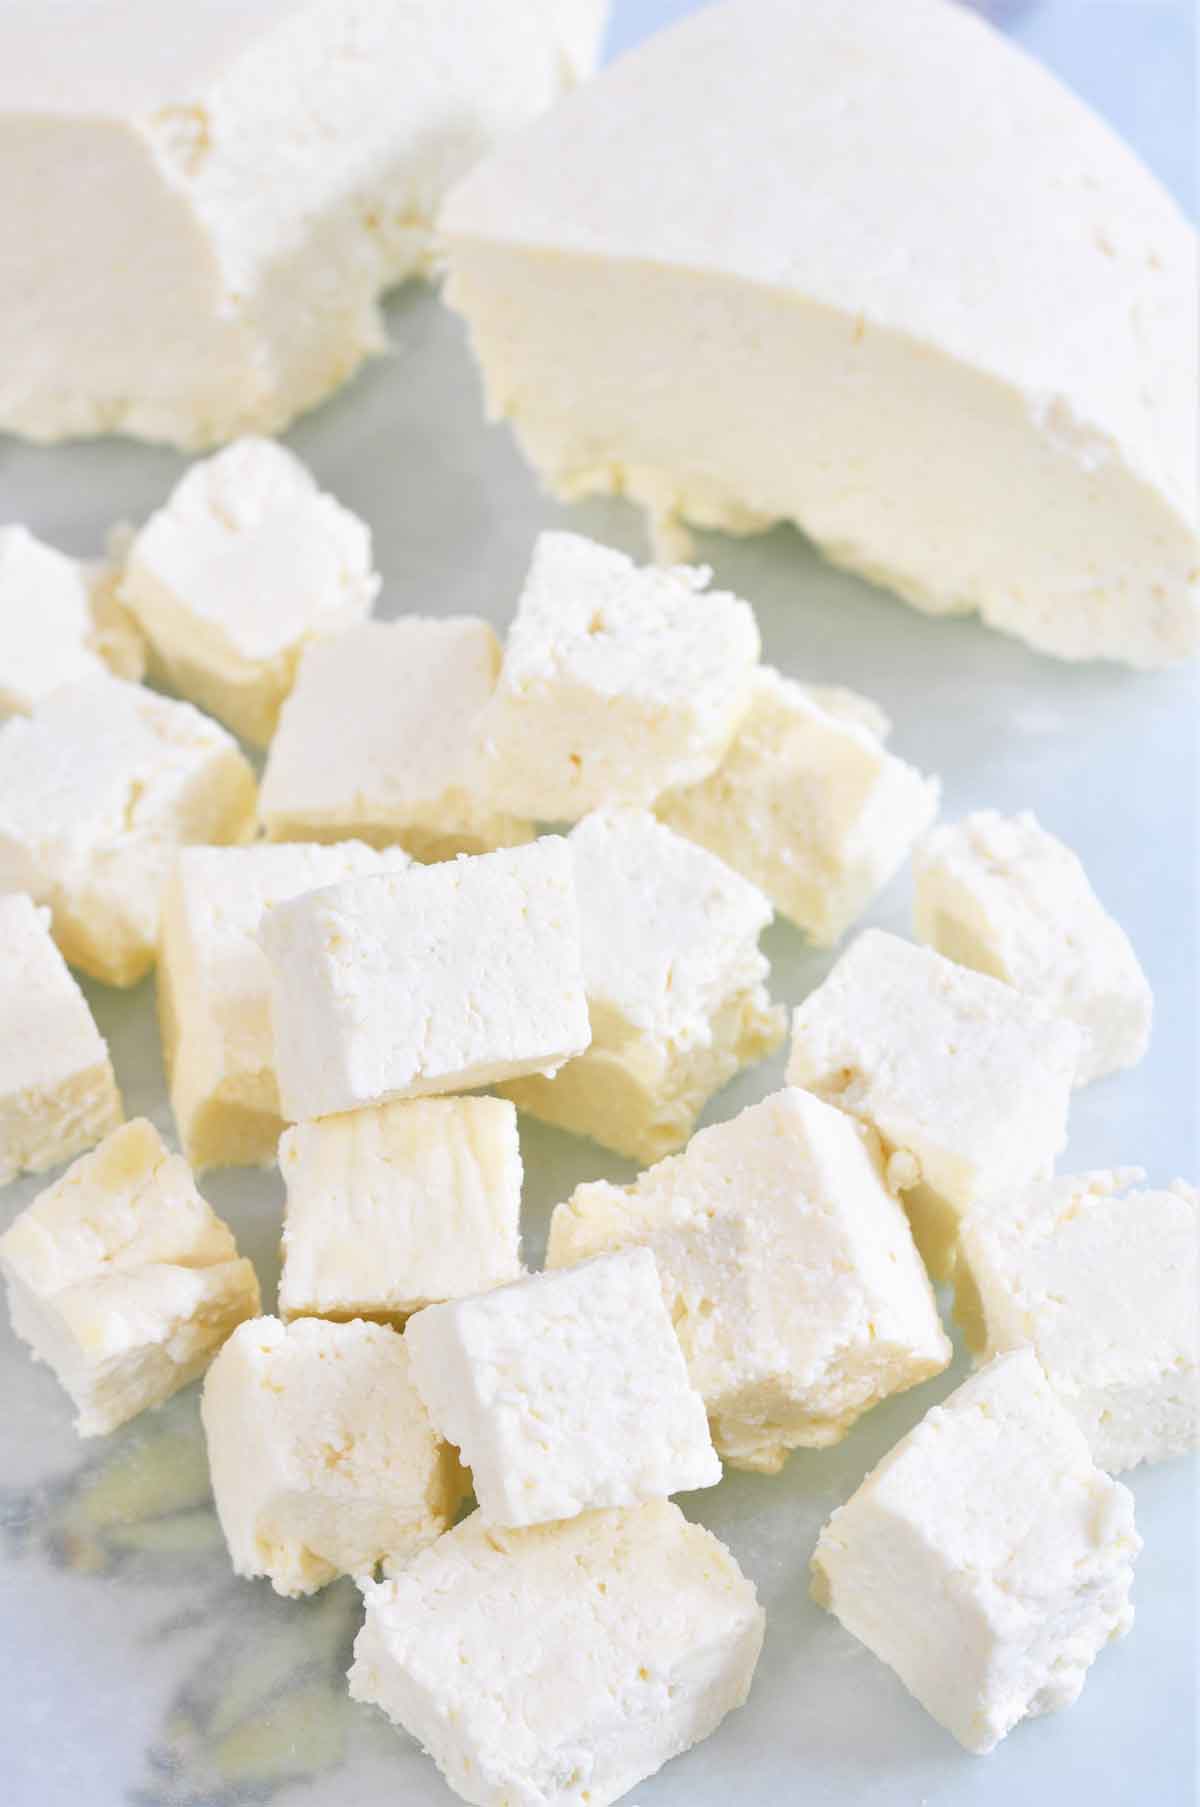 Home made paneer cut into cubes.